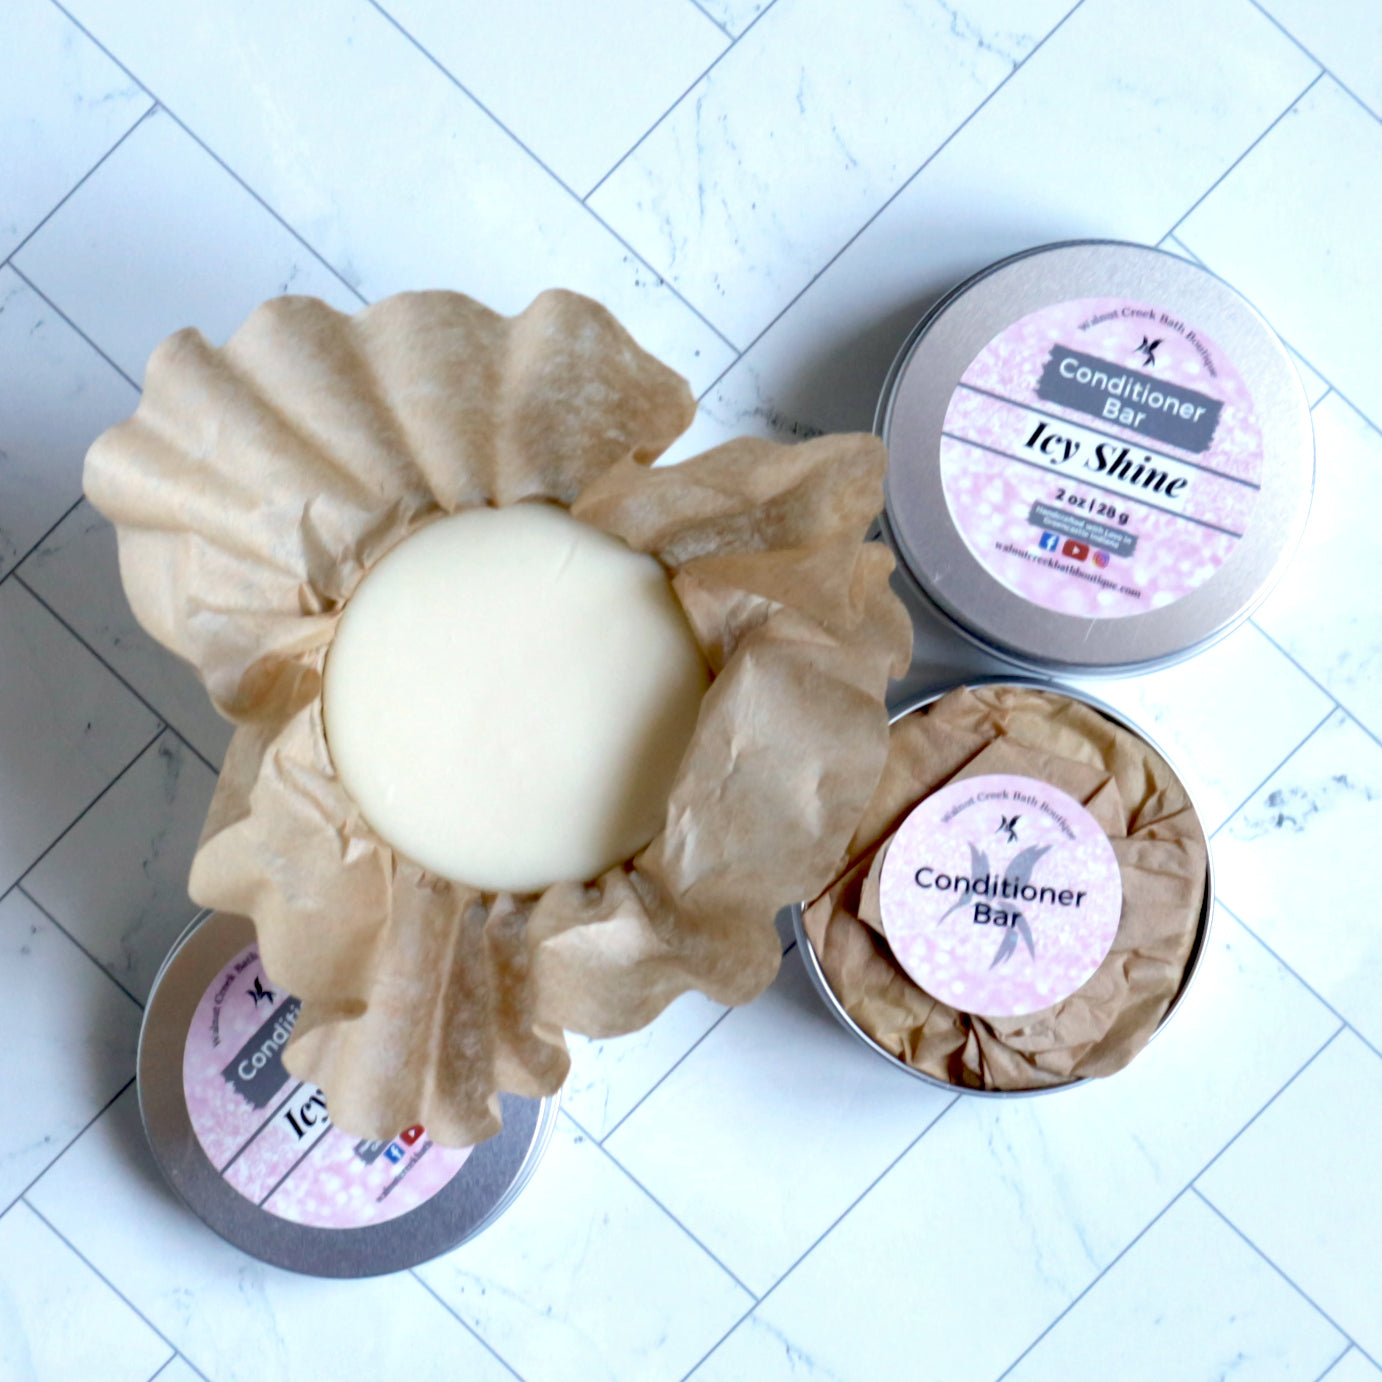 3 tins of conditioner bar are shown lying on a marble surface. One is closed showing the top label that is pink in color with the words conditioner bar and icy shine on top. another tin is open showing the inside packaging with brown paper wrapping and a pink sticker holding it closed. the sticker has a hummingbird behind the words conditioner bar written across it. the last tin is open with the paper open to show the conditioner bar in the tin.